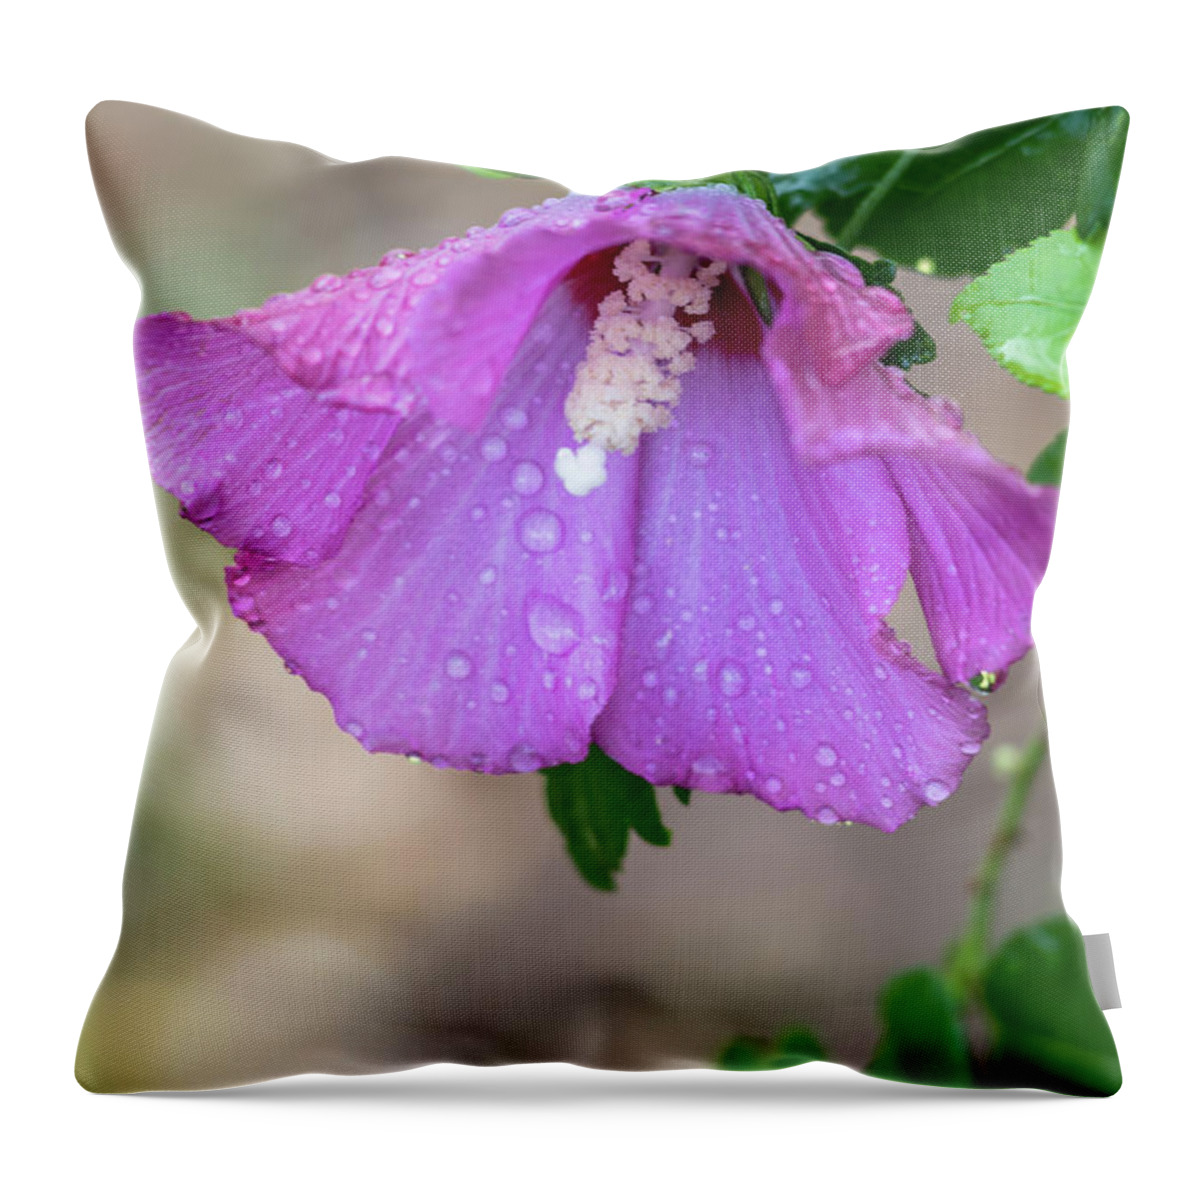 Terry D Photography Throw Pillow featuring the photograph Purple Rose Of Sharon Raindrops by Terry DeLuco